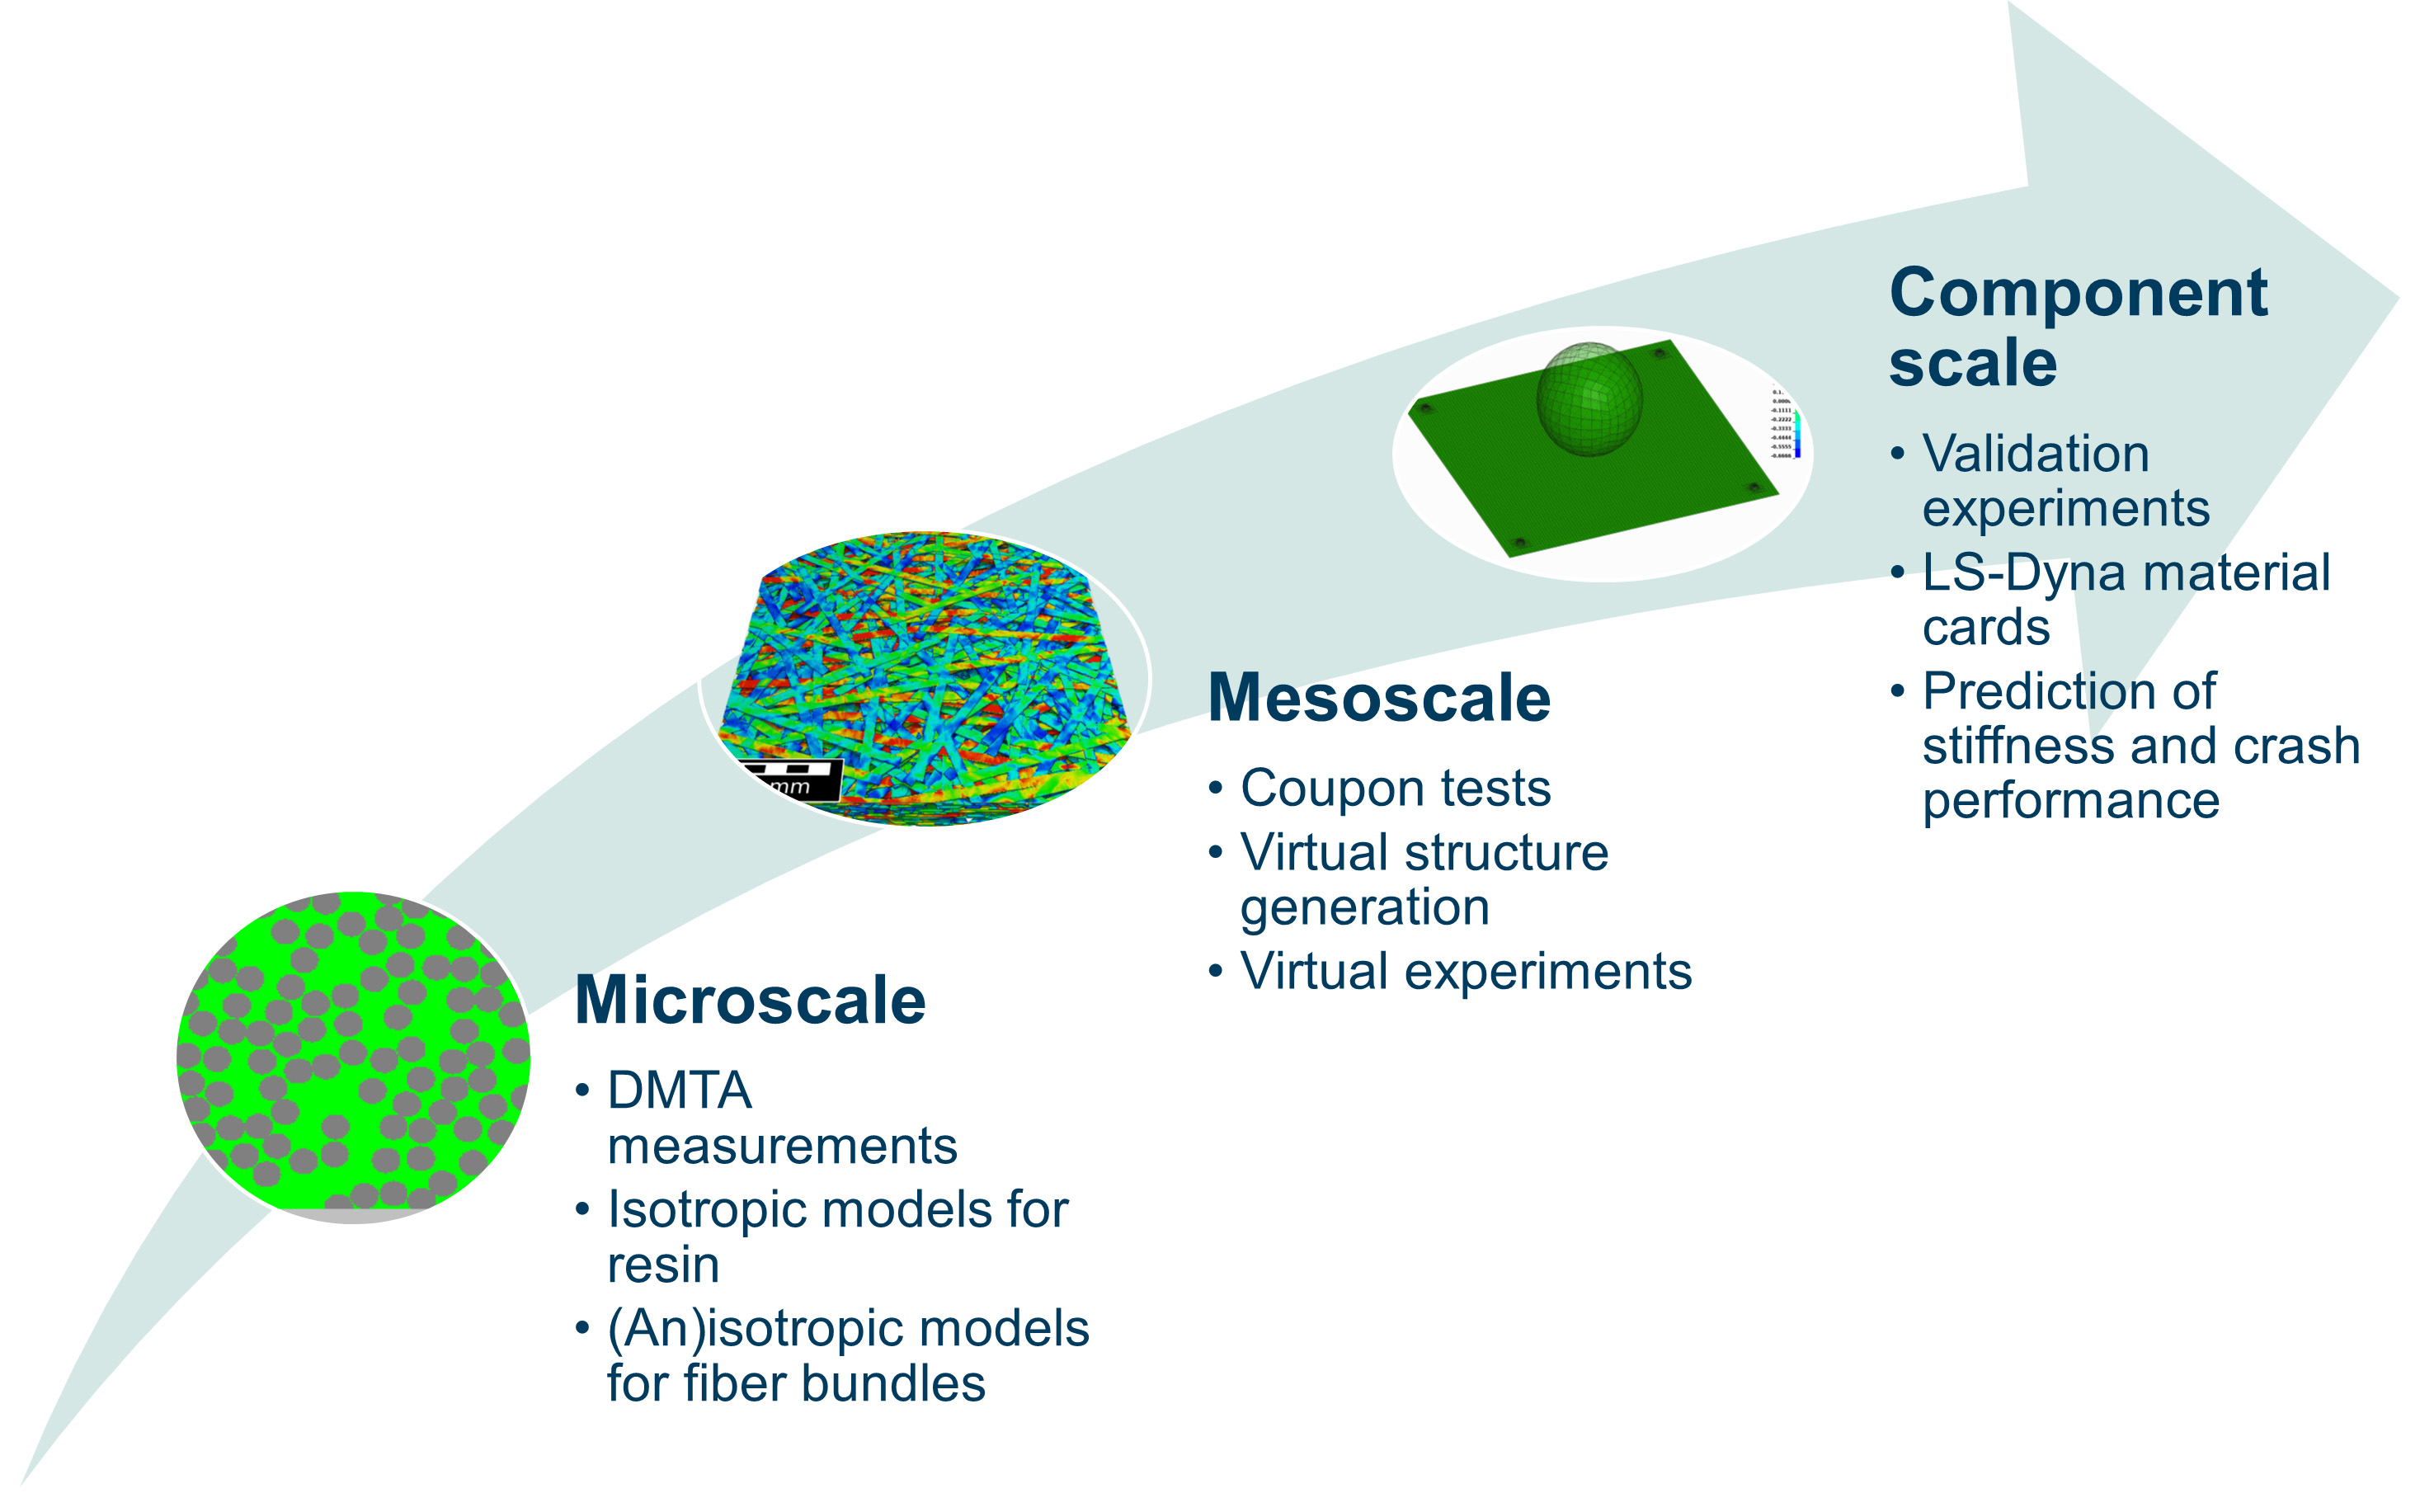 Multiscale methodology: From the microscale to the mesoscale to the lightweight component.